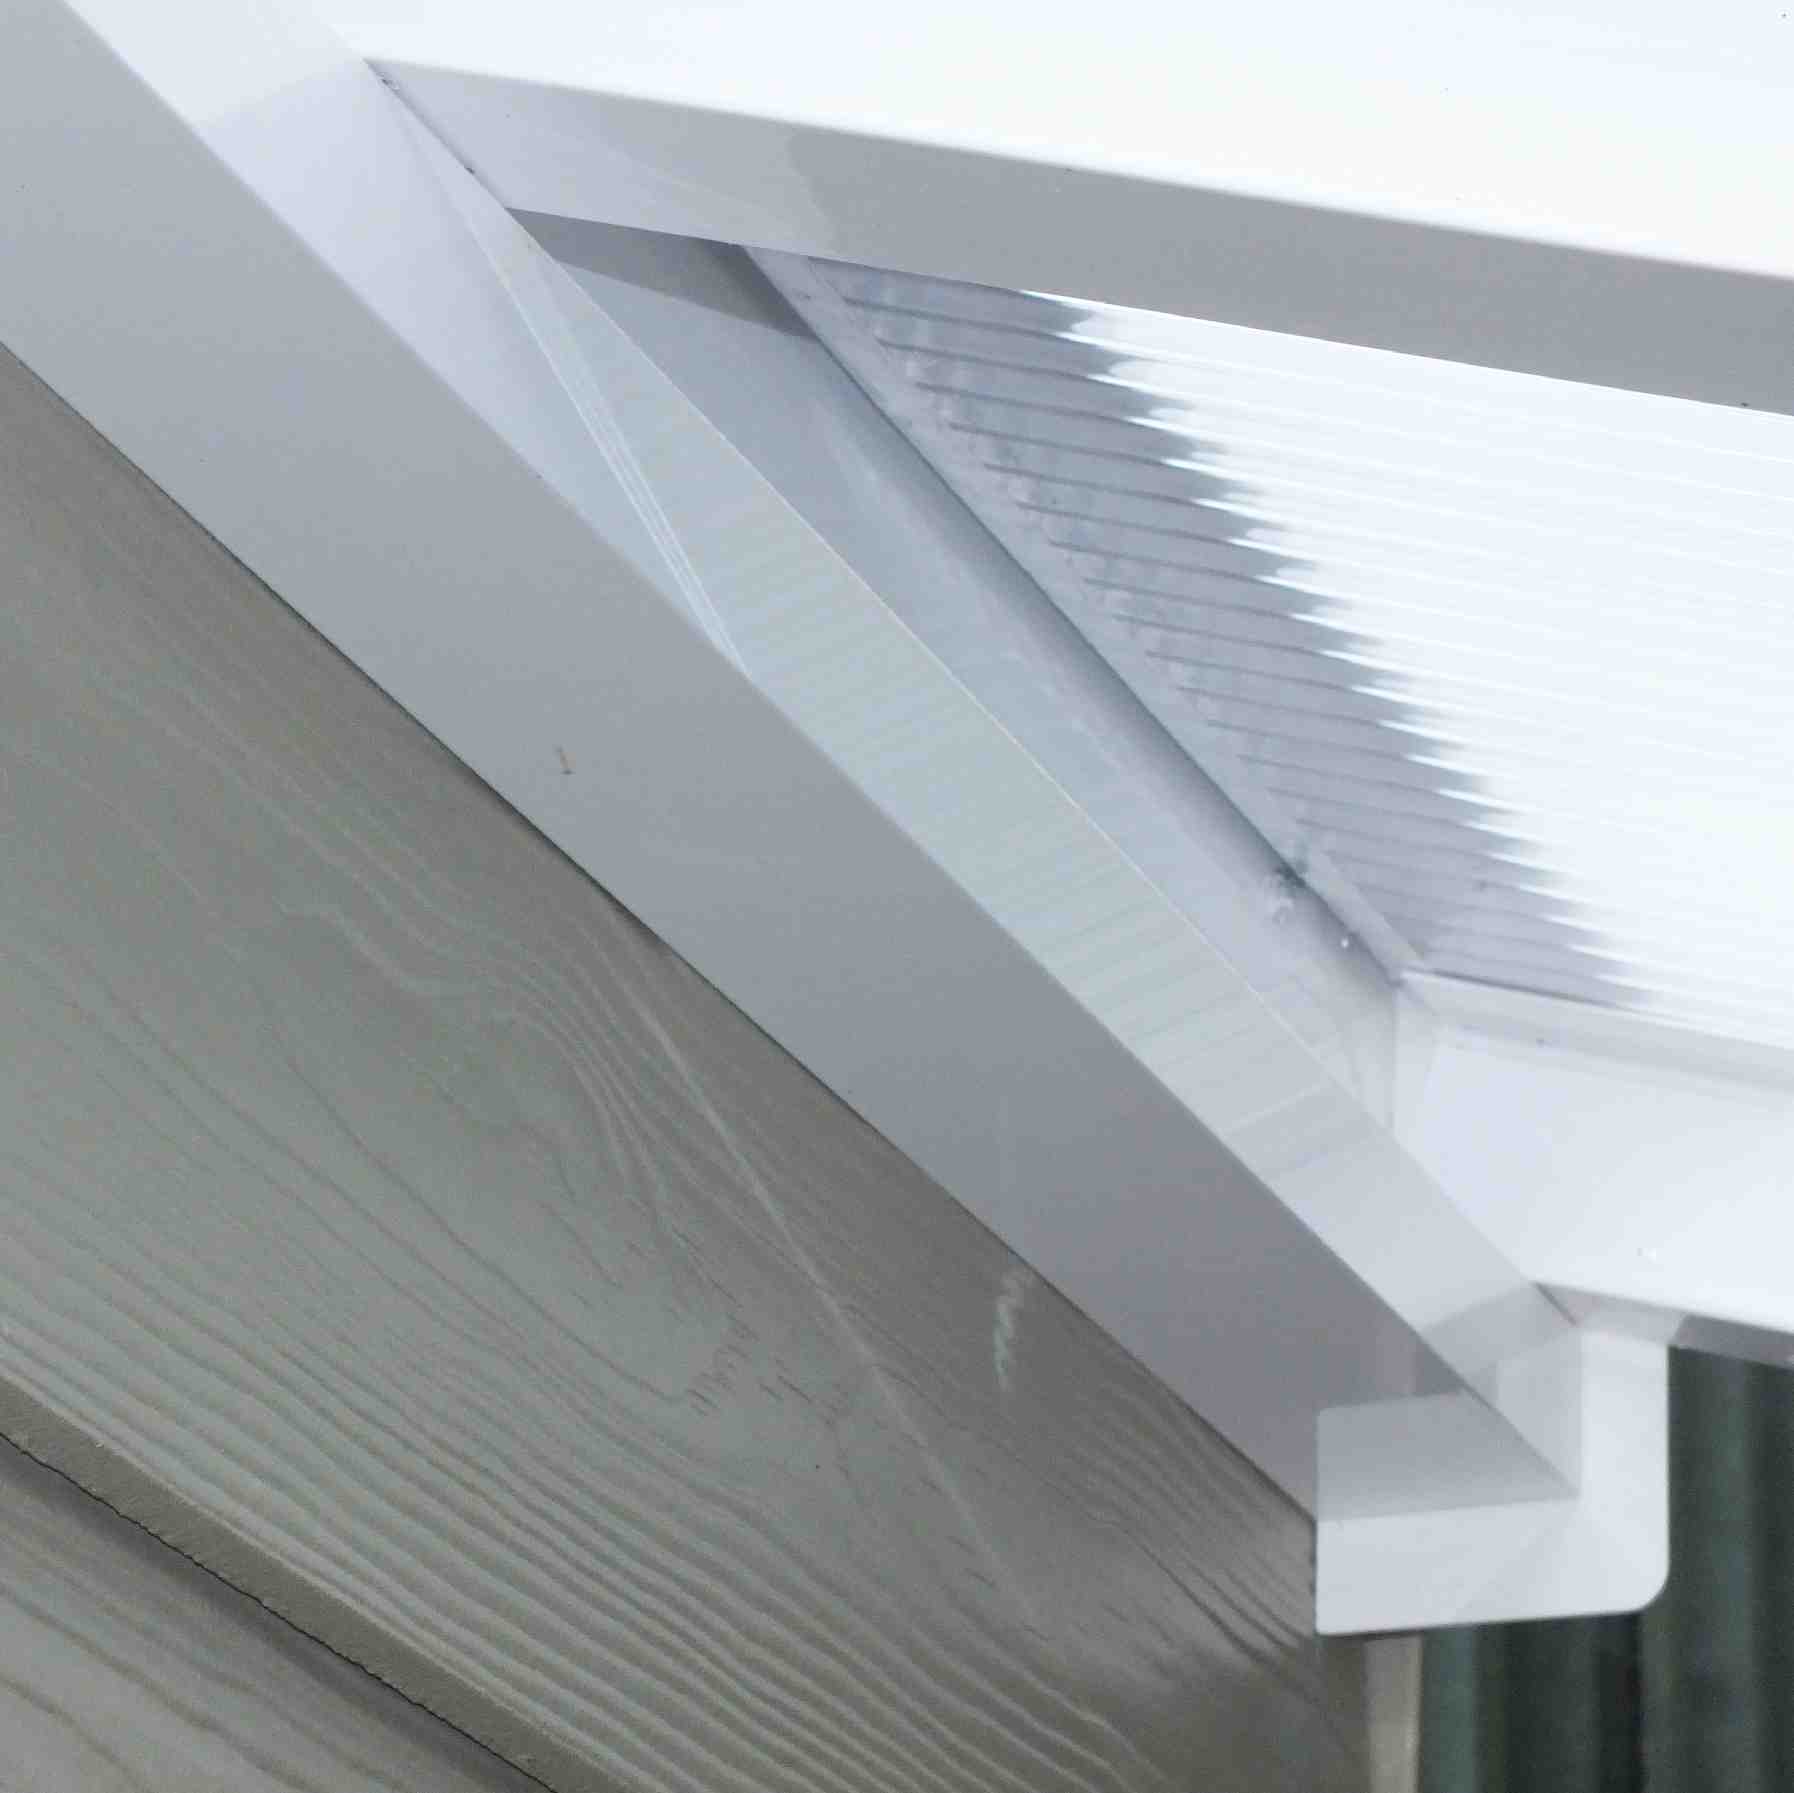 Great deals on Omega Verandah White with 16mm Polycarbonate Glazing - 12.0m (W) x 2.5m (P), (5) Supporting Posts